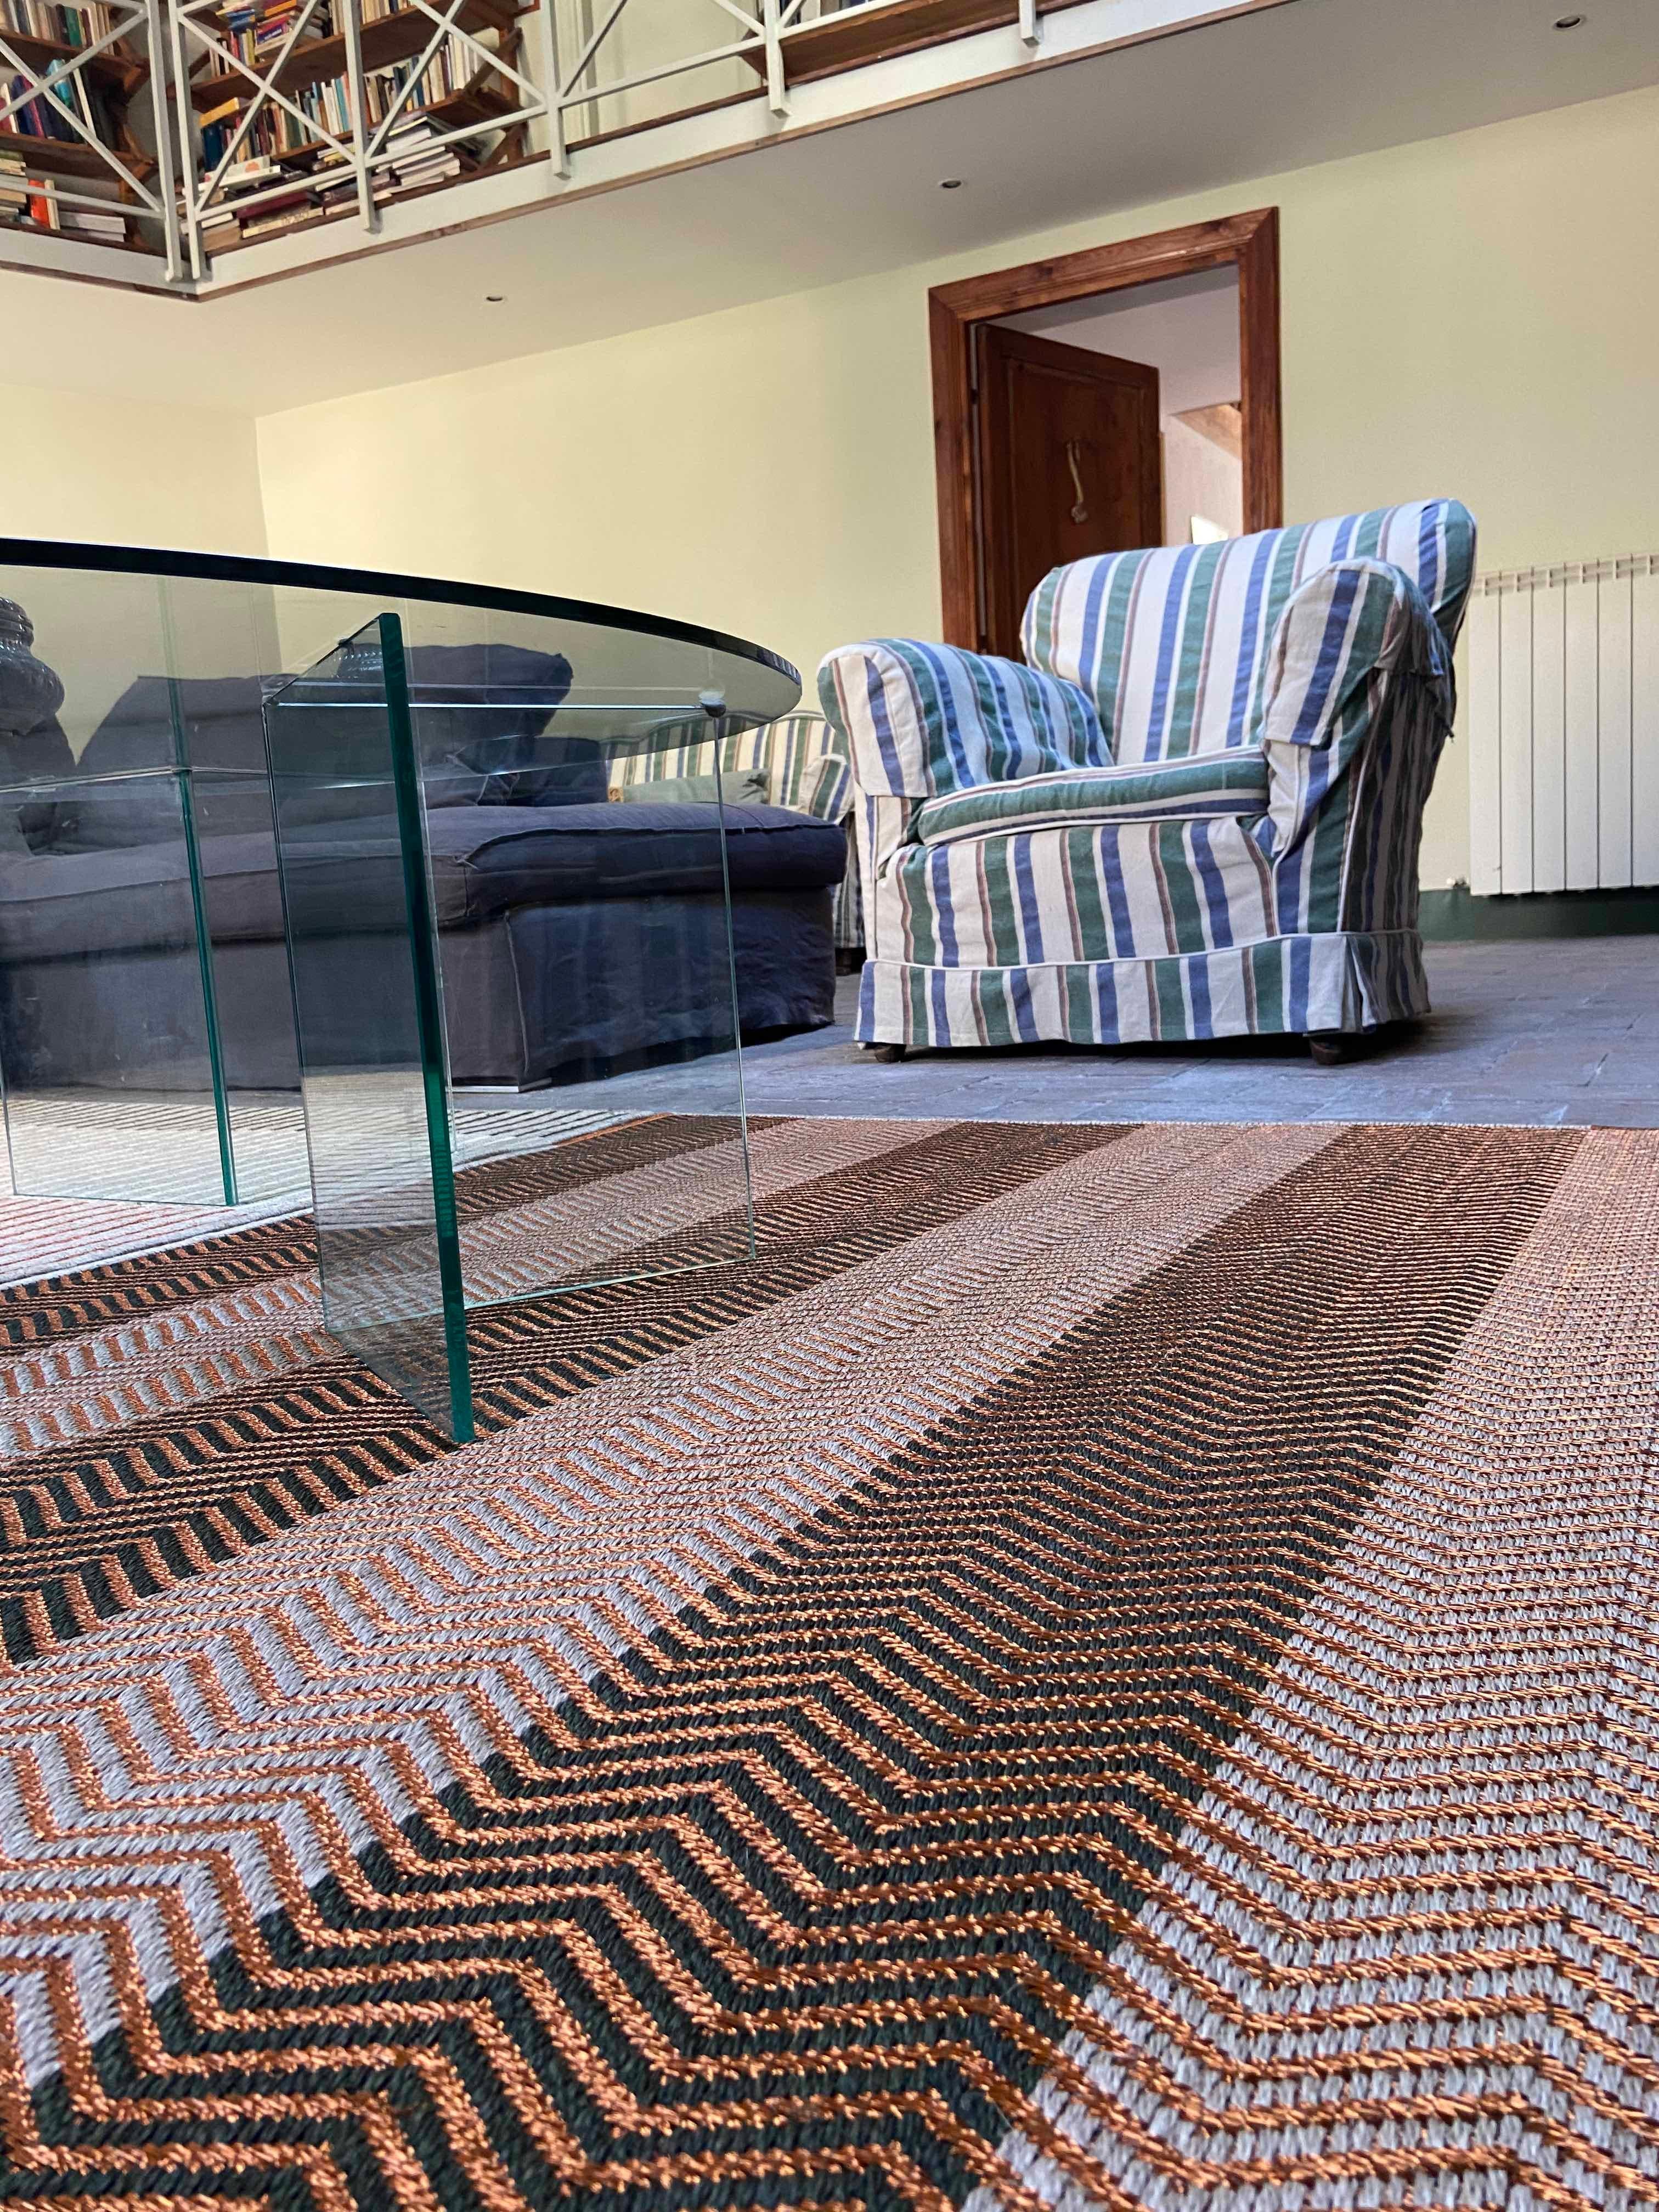 The Baby Ziggy rug from the Lines collection features patterns inspired by its name, with an explosion of zigzag lines in the center of the room. This creation is made of 50% Colombian agave fiber and 50% pure copper, and has 500 threads / m².